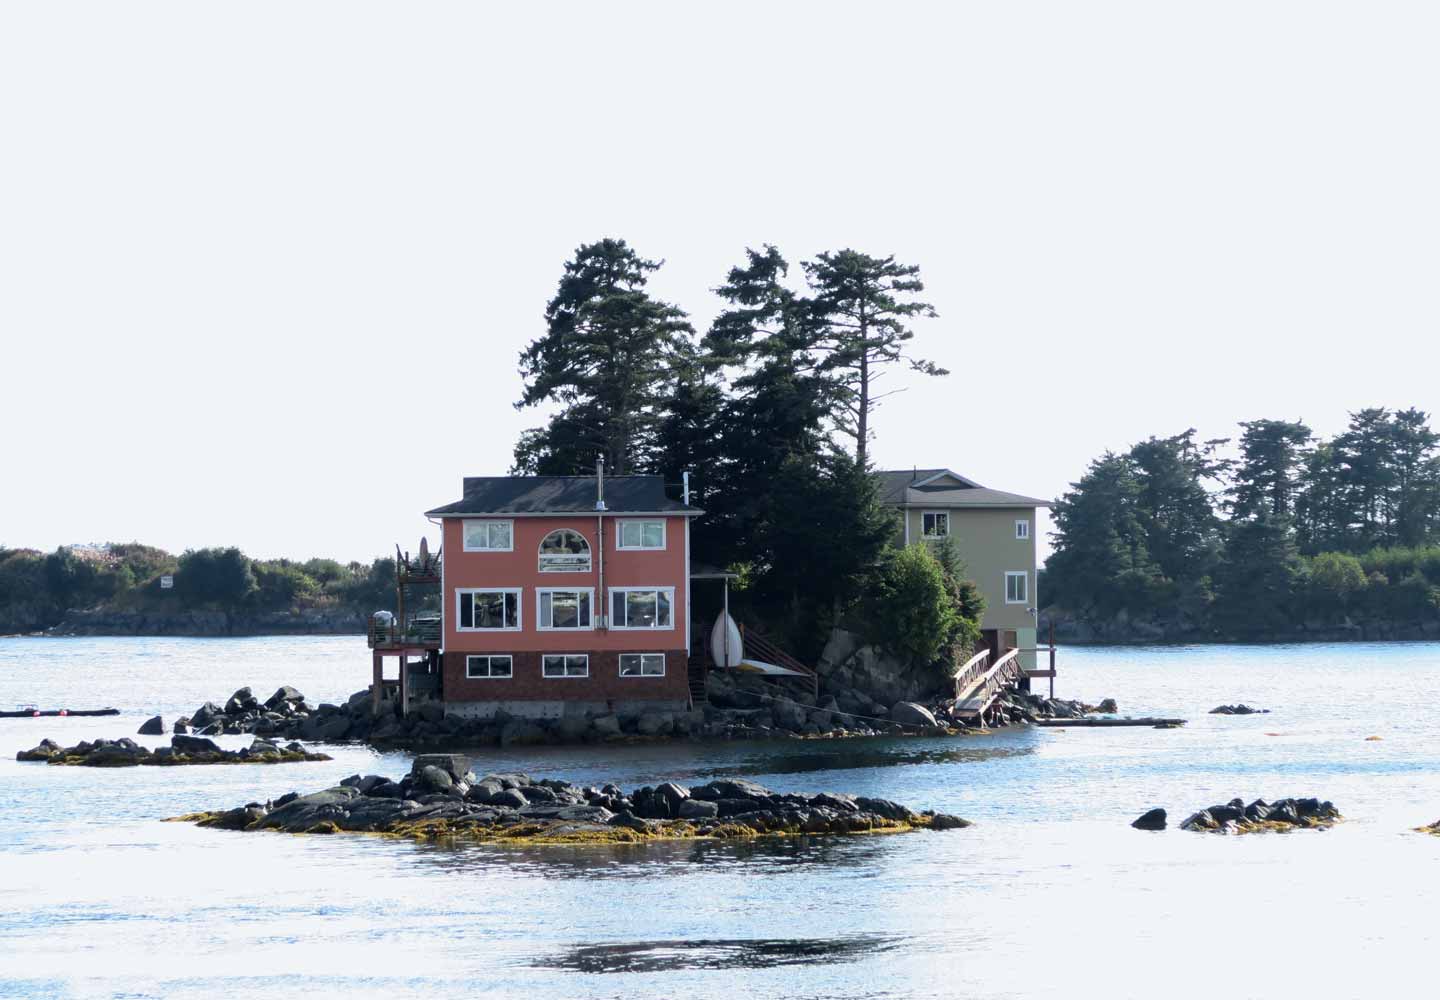 A unique location, Sitka sits between the open ocean and Inside Passage, with a large collection of islands surrounding, including the one these homes are perched on.